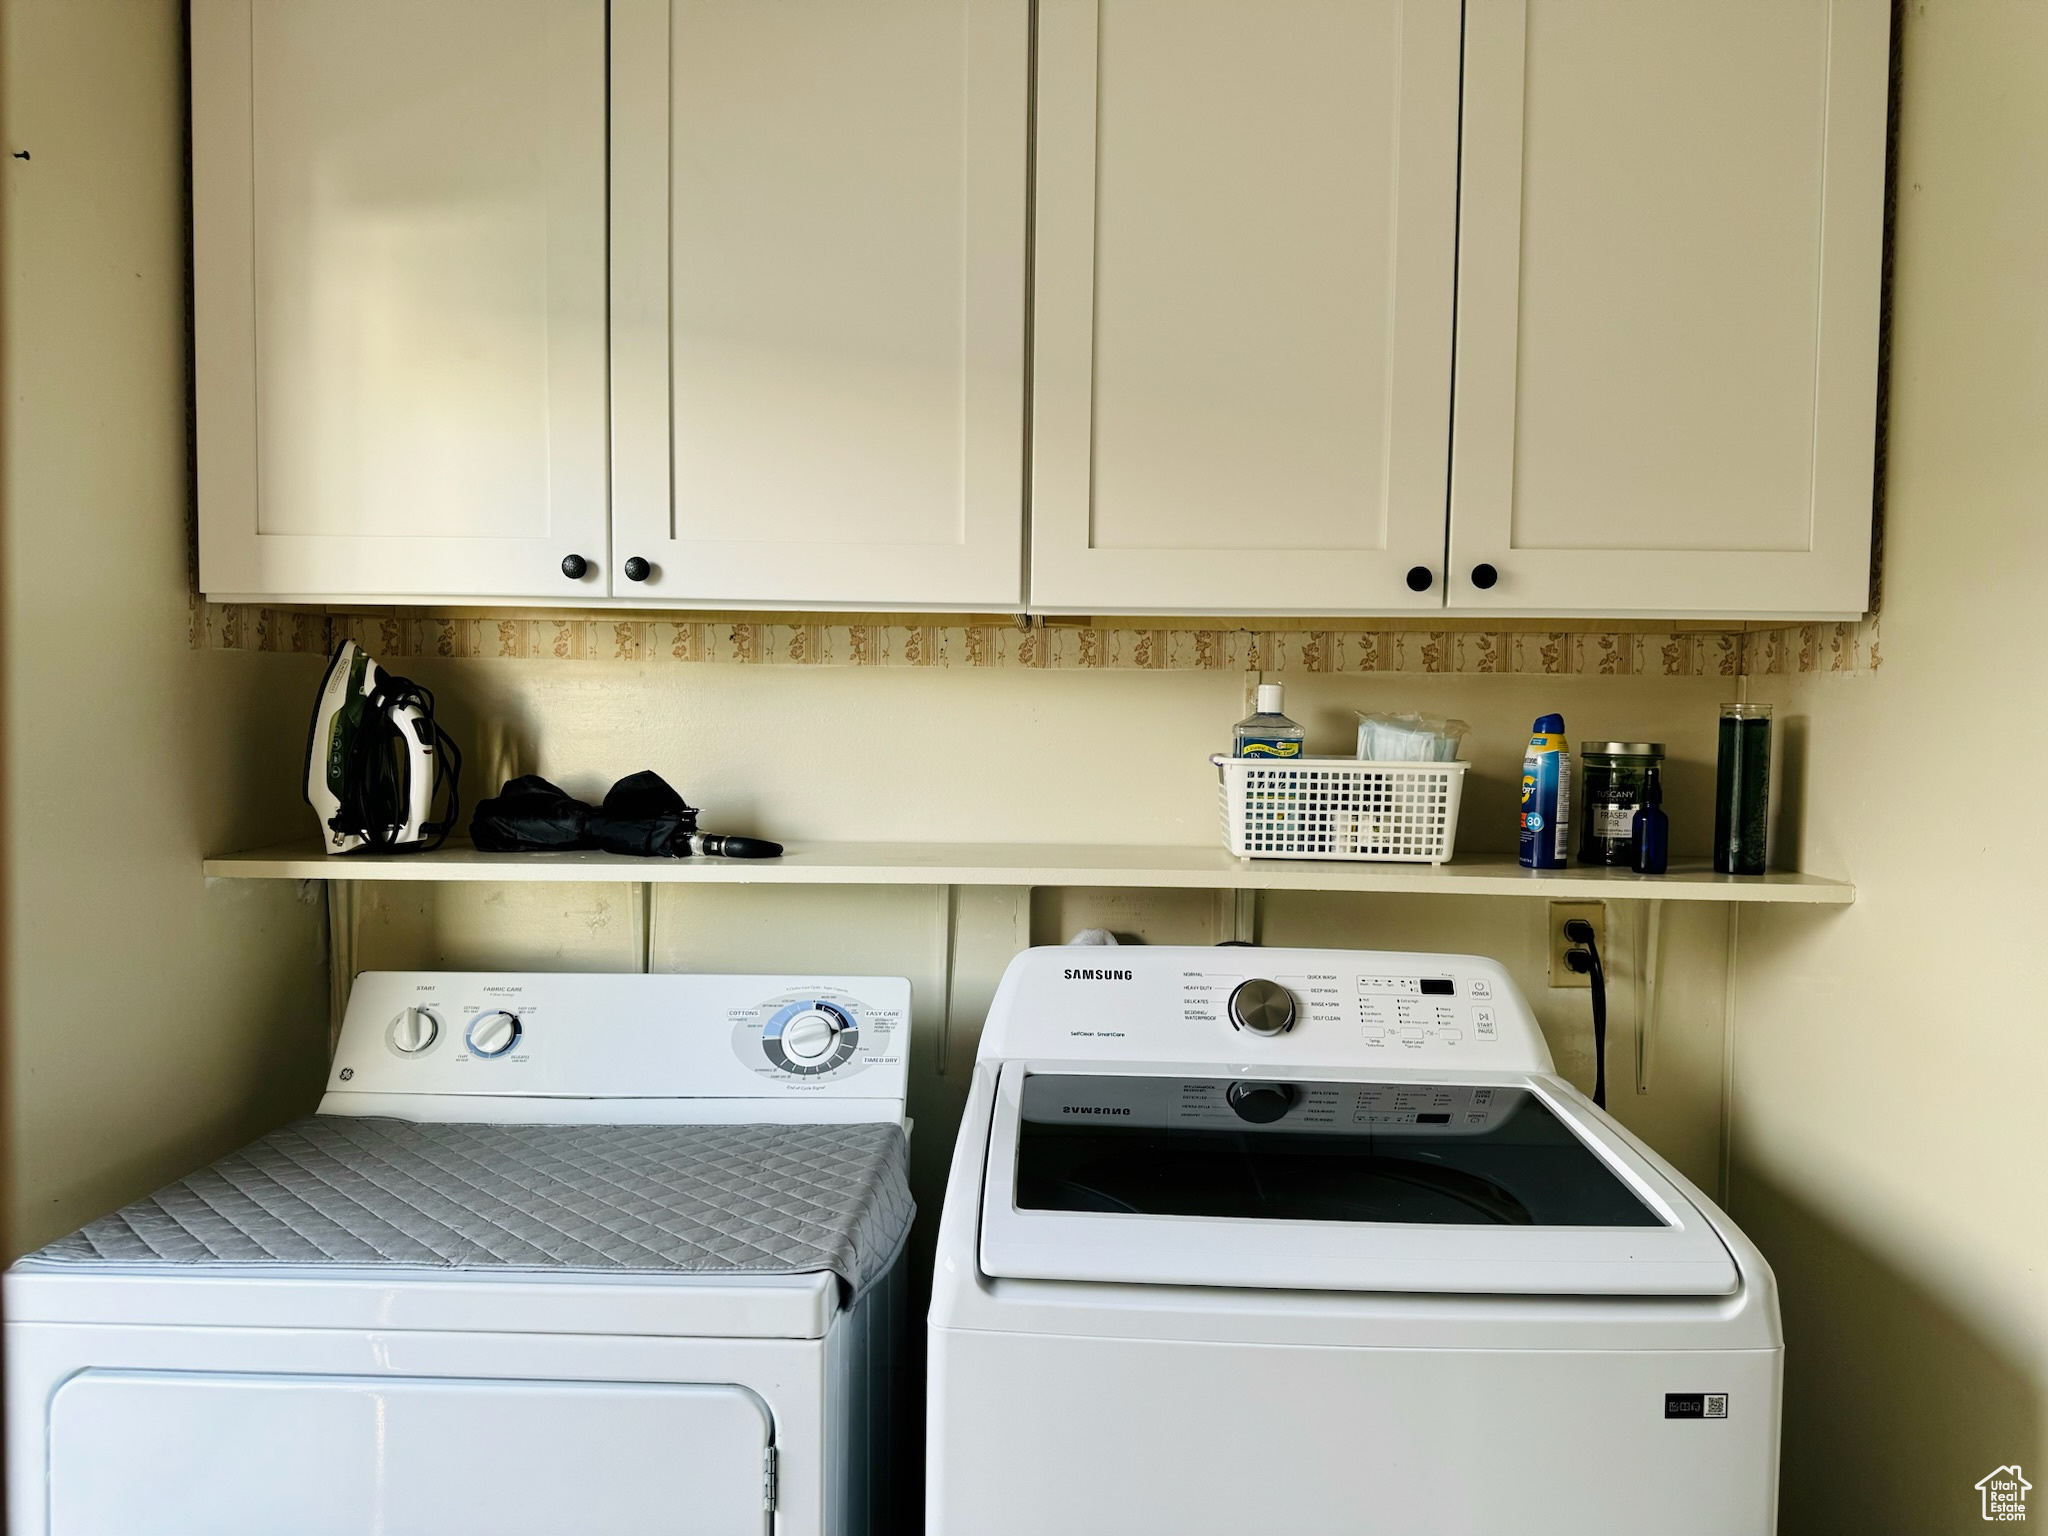 Clothes washing area with washing machine and dryer and cabinets